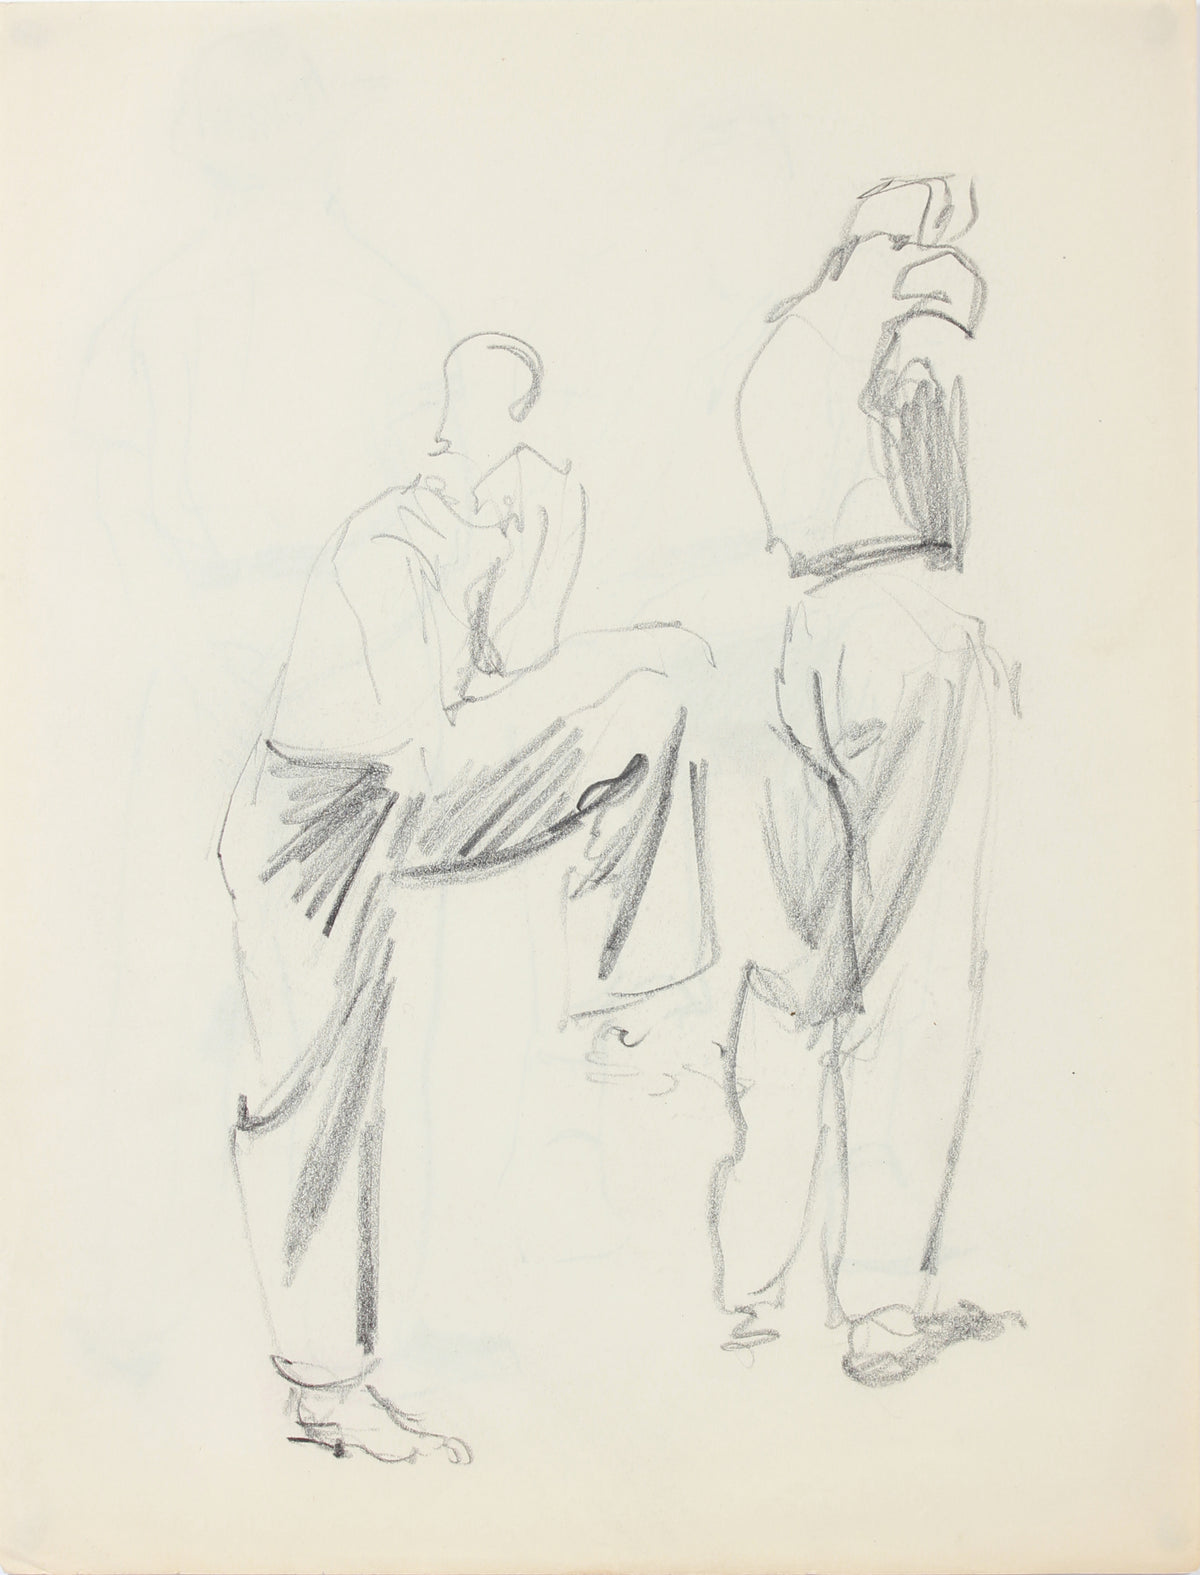 Stylized Sketch of Two Male Figures &lt;br&gt;1940-50s Graphite &lt;br&gt;&lt;br&gt;#A8531